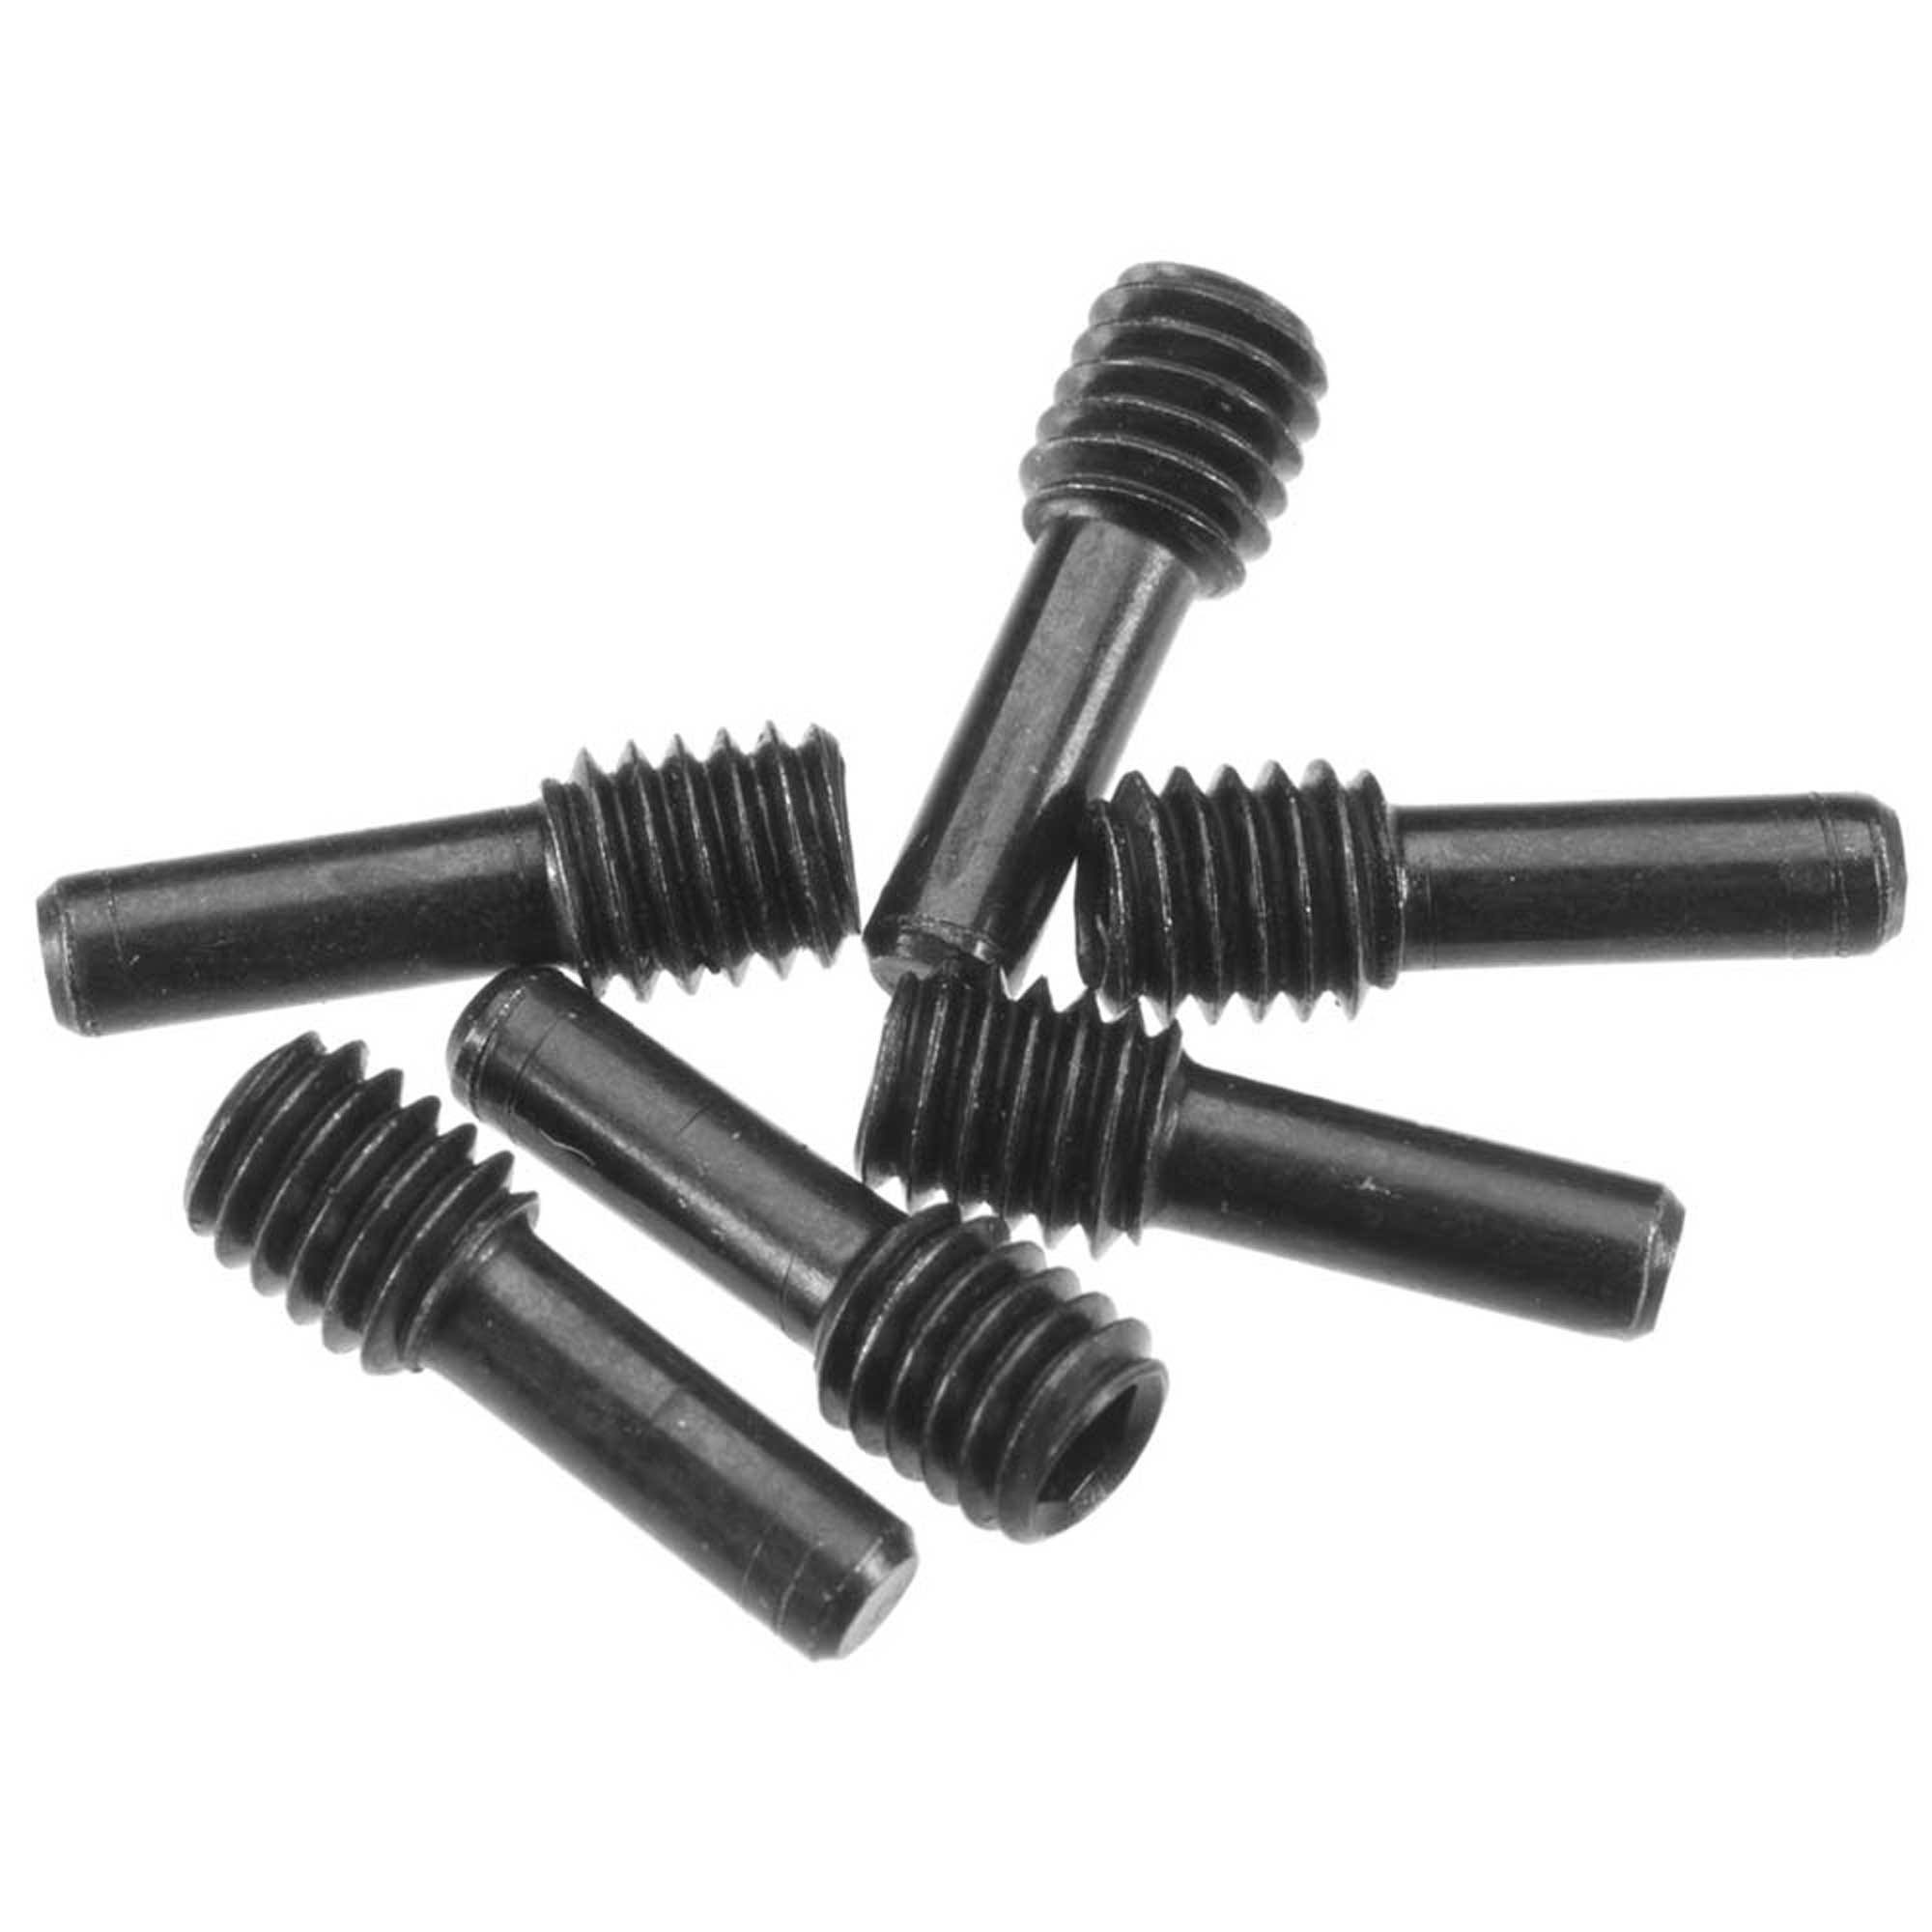 Axial Screw Shaft - M4, 2.5x12mm, 6 Pack